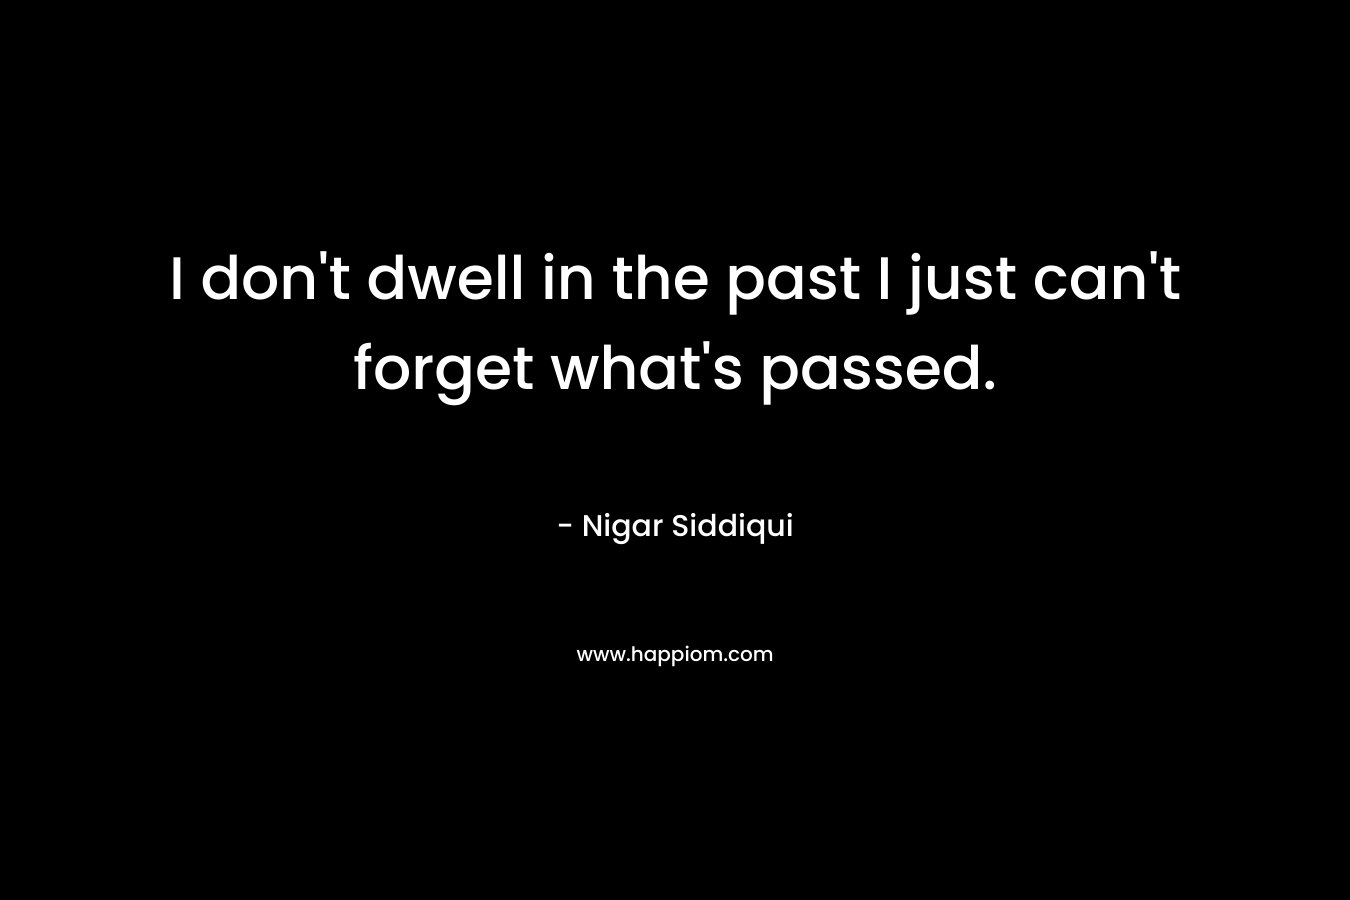 I don’t dwell in the past I just can’t forget what’s passed. – Nigar Siddiqui